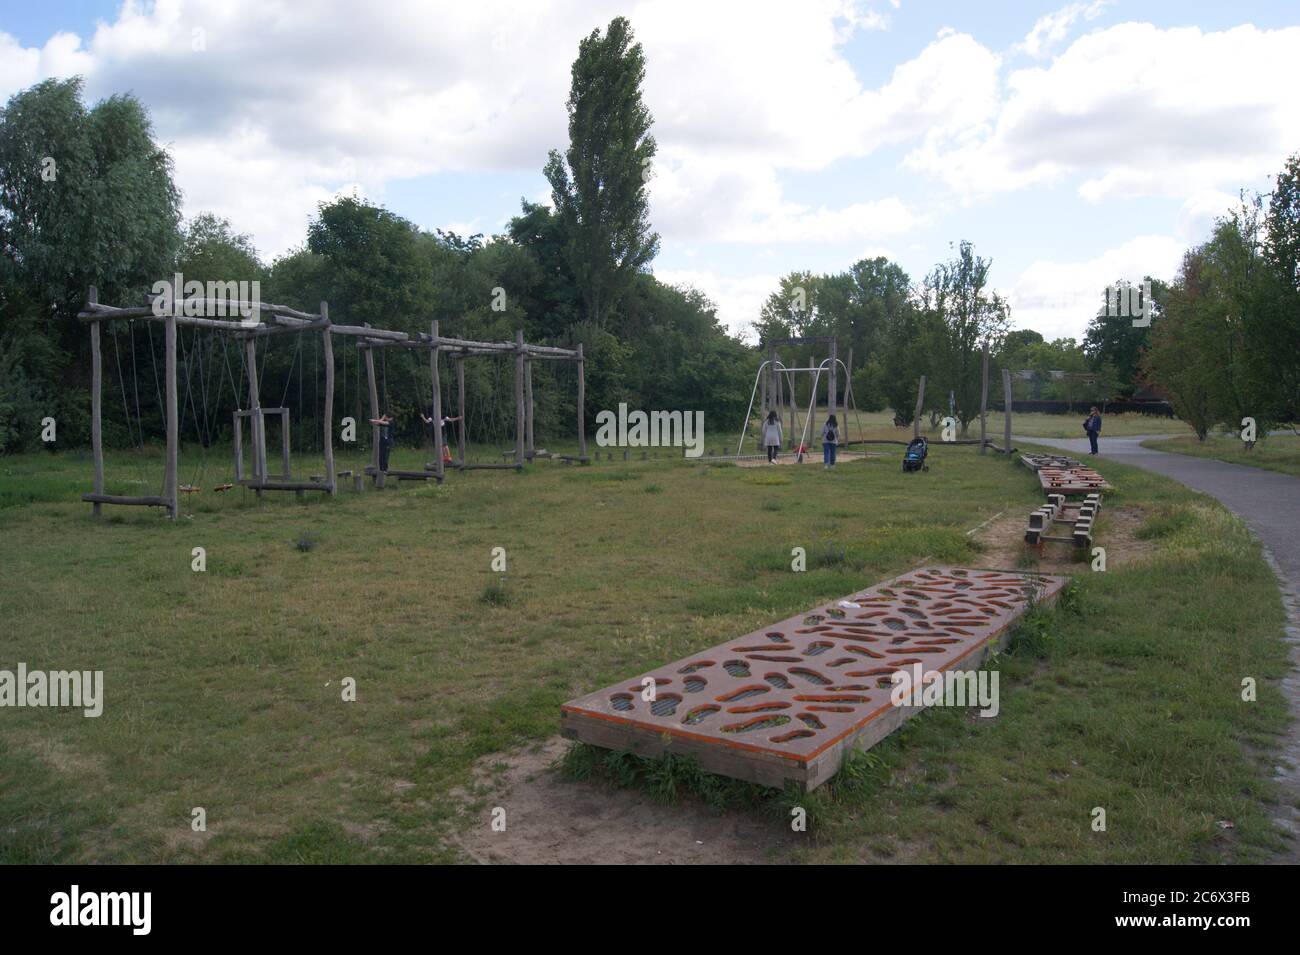 Spielplatz High Resolution Stock Photography and Images - Alamy